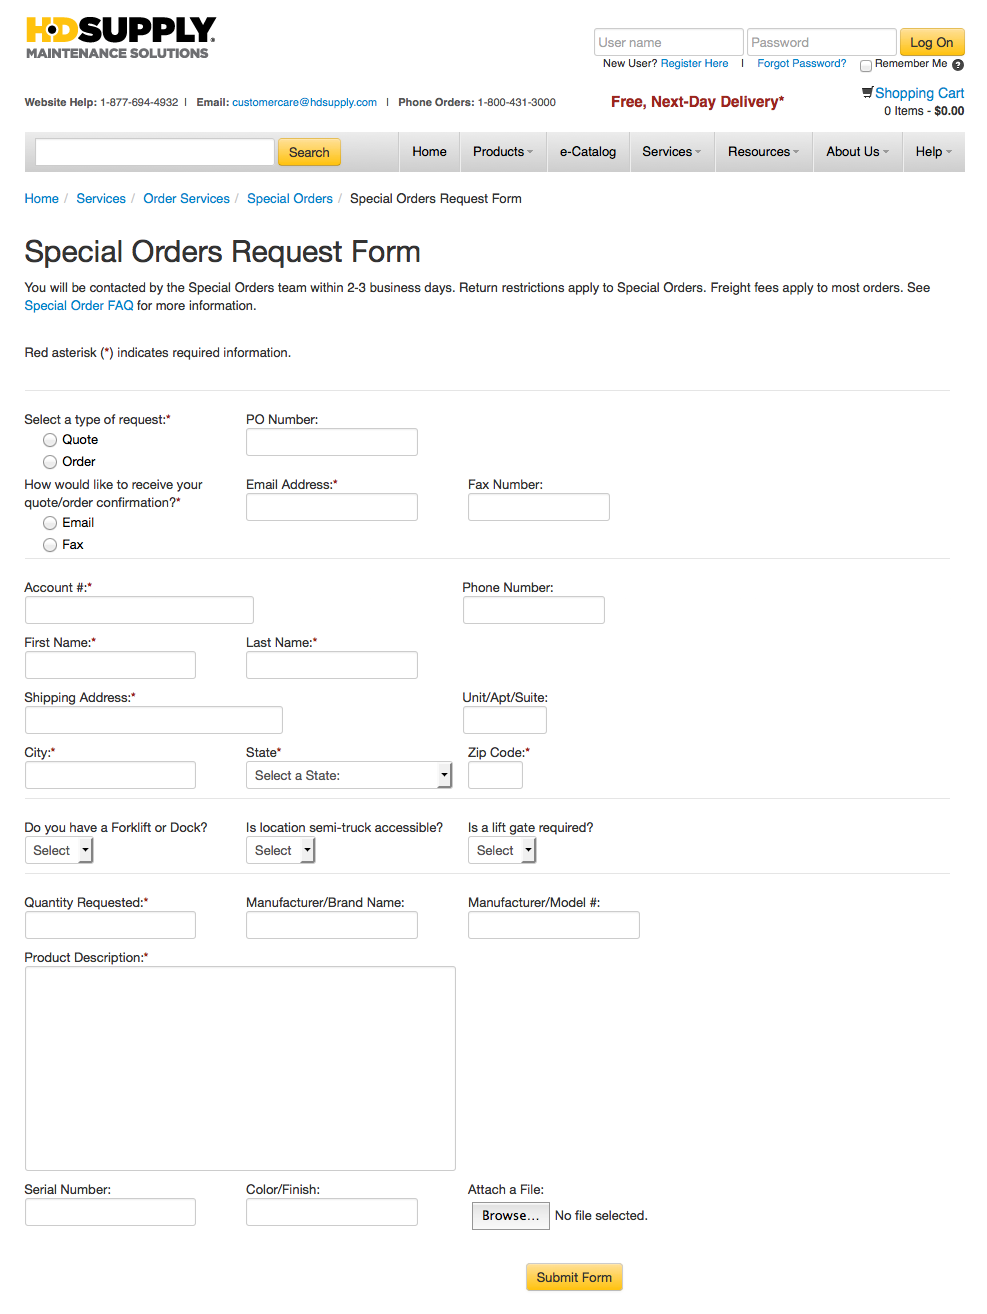 Special Order Forms online